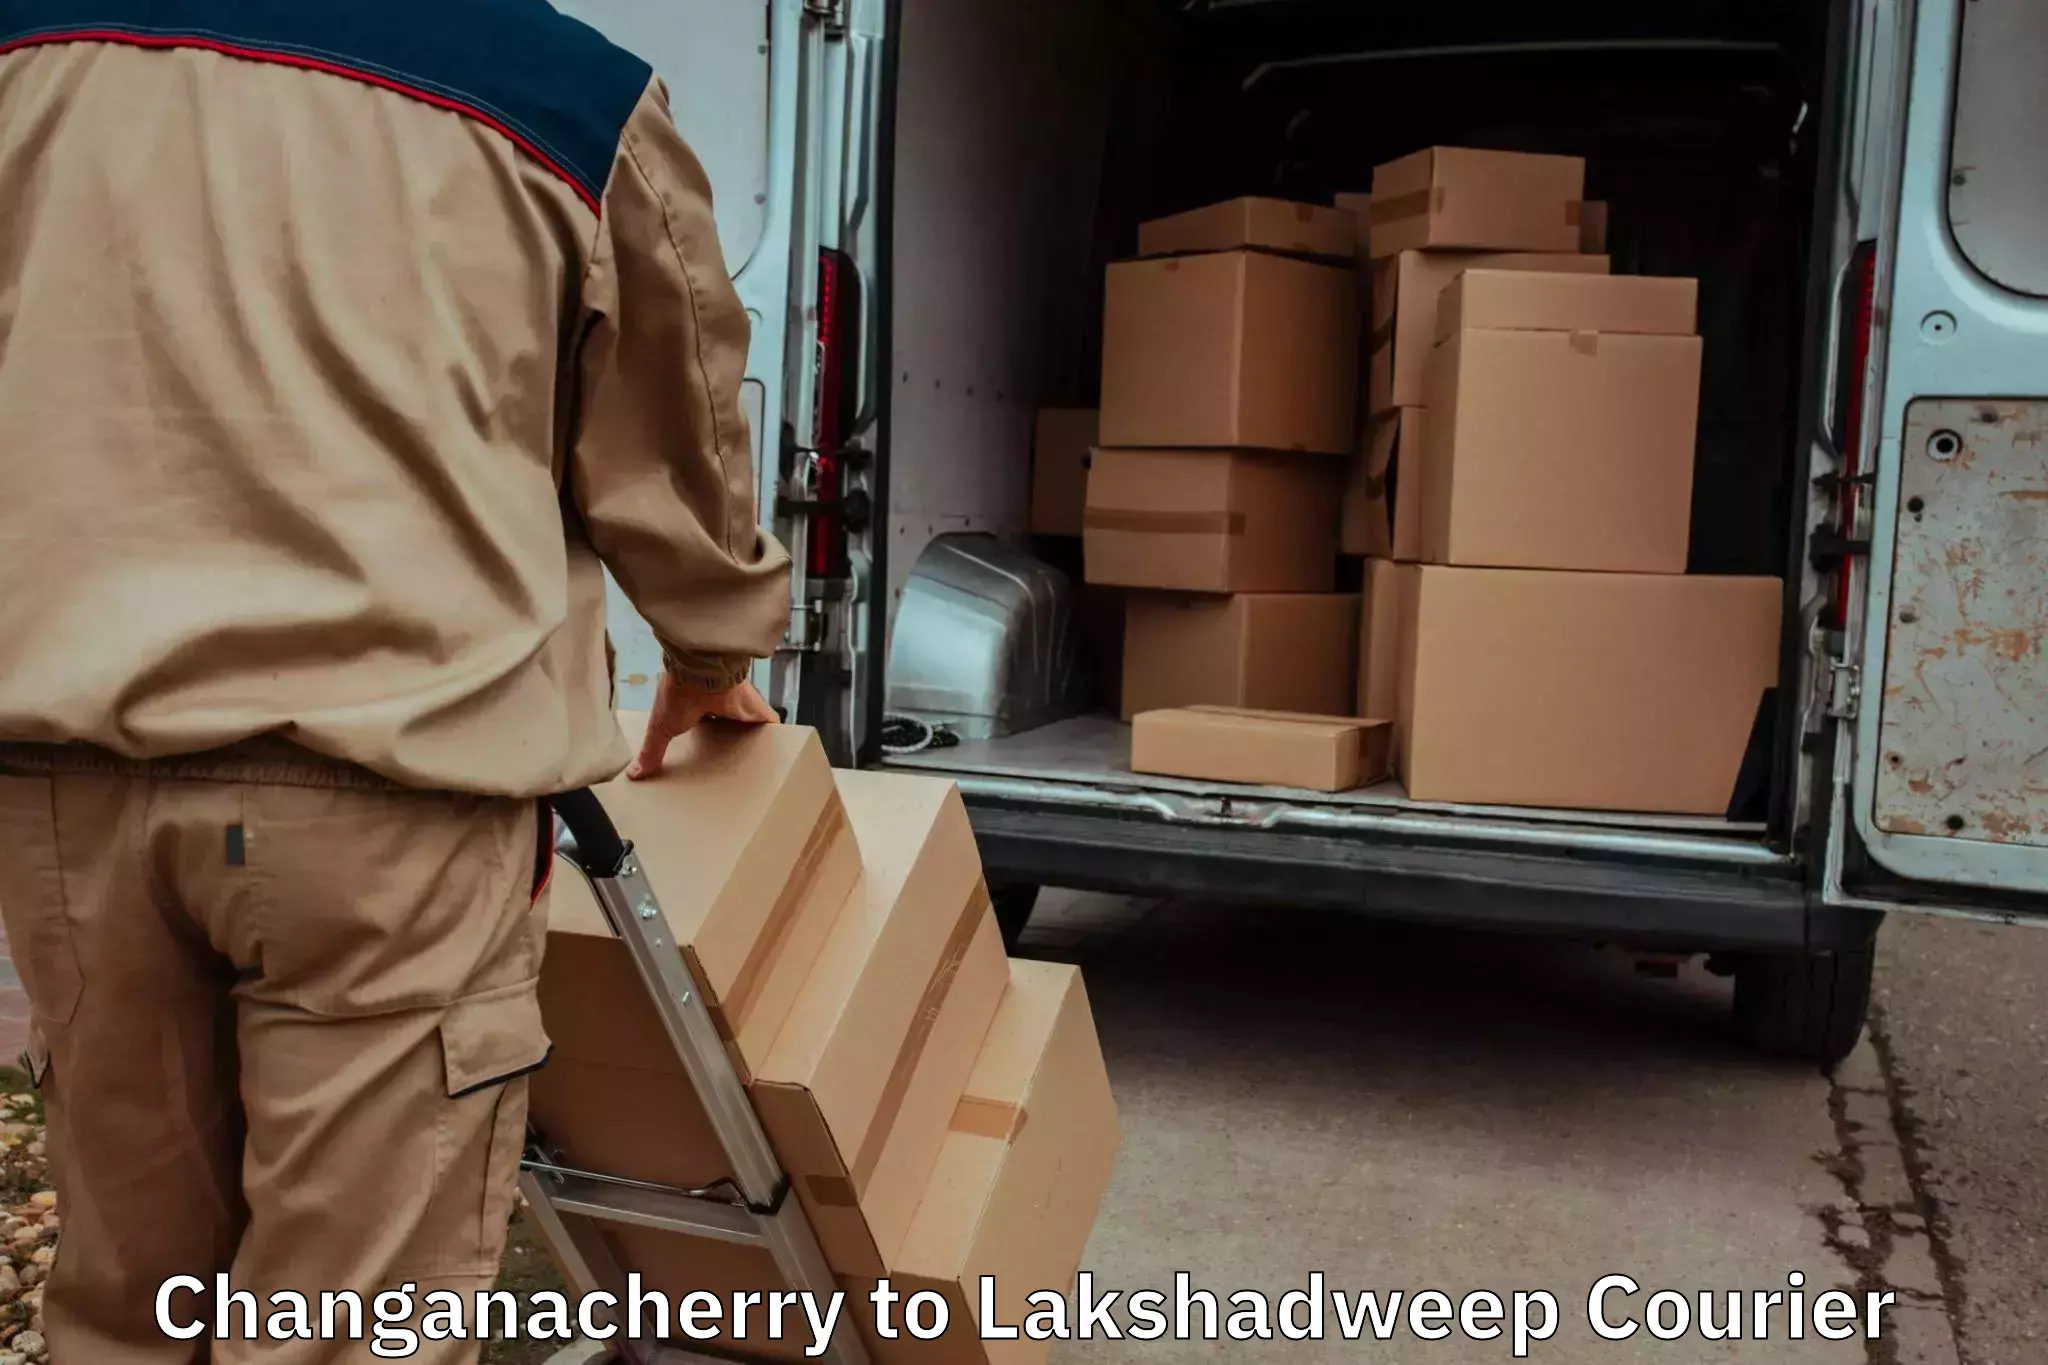 Furniture transport and logistics in Changanacherry to Lakshadweep